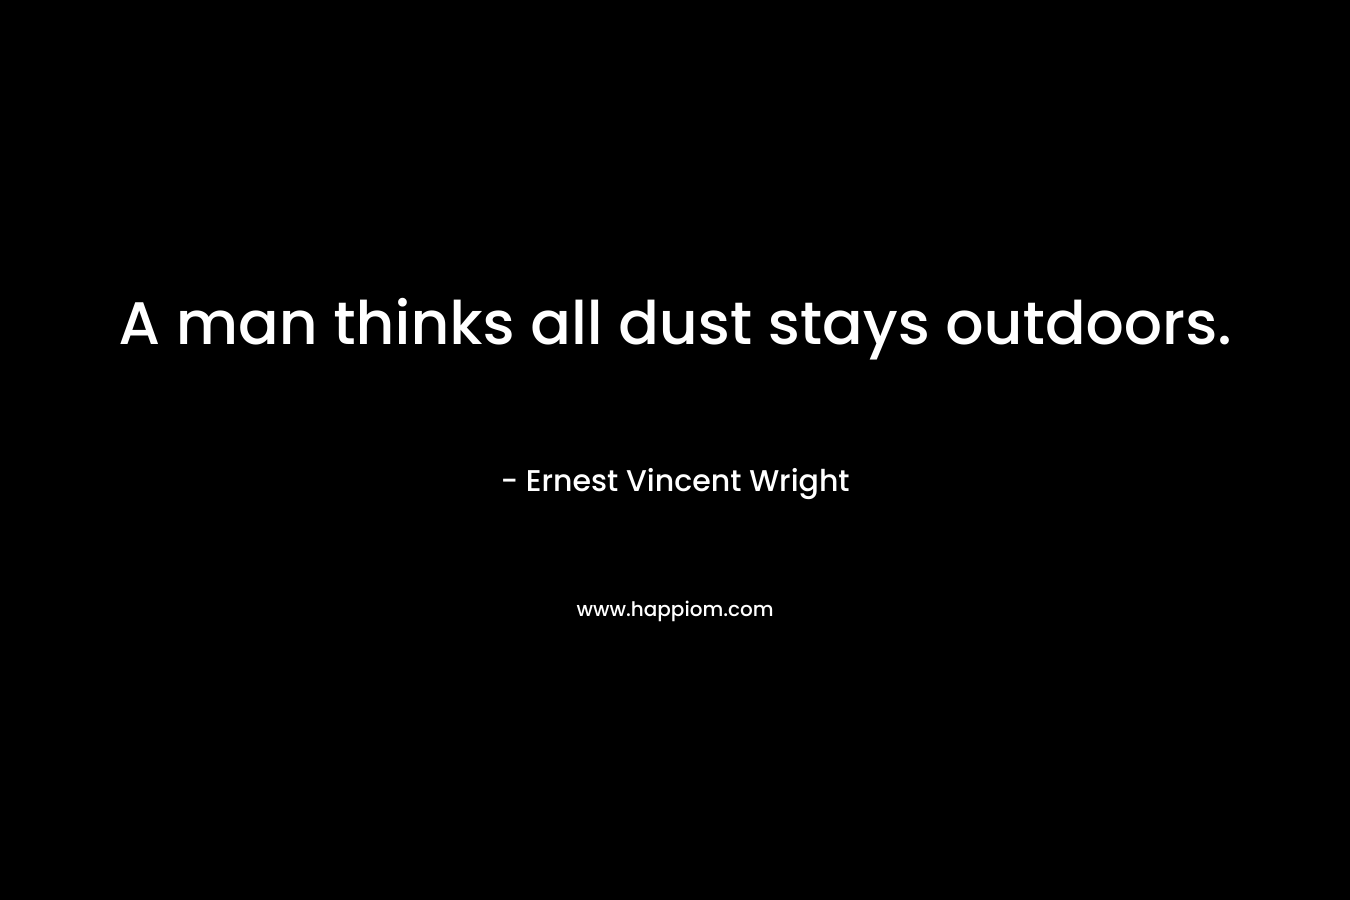 A man thinks all dust stays outdoors. – Ernest Vincent Wright